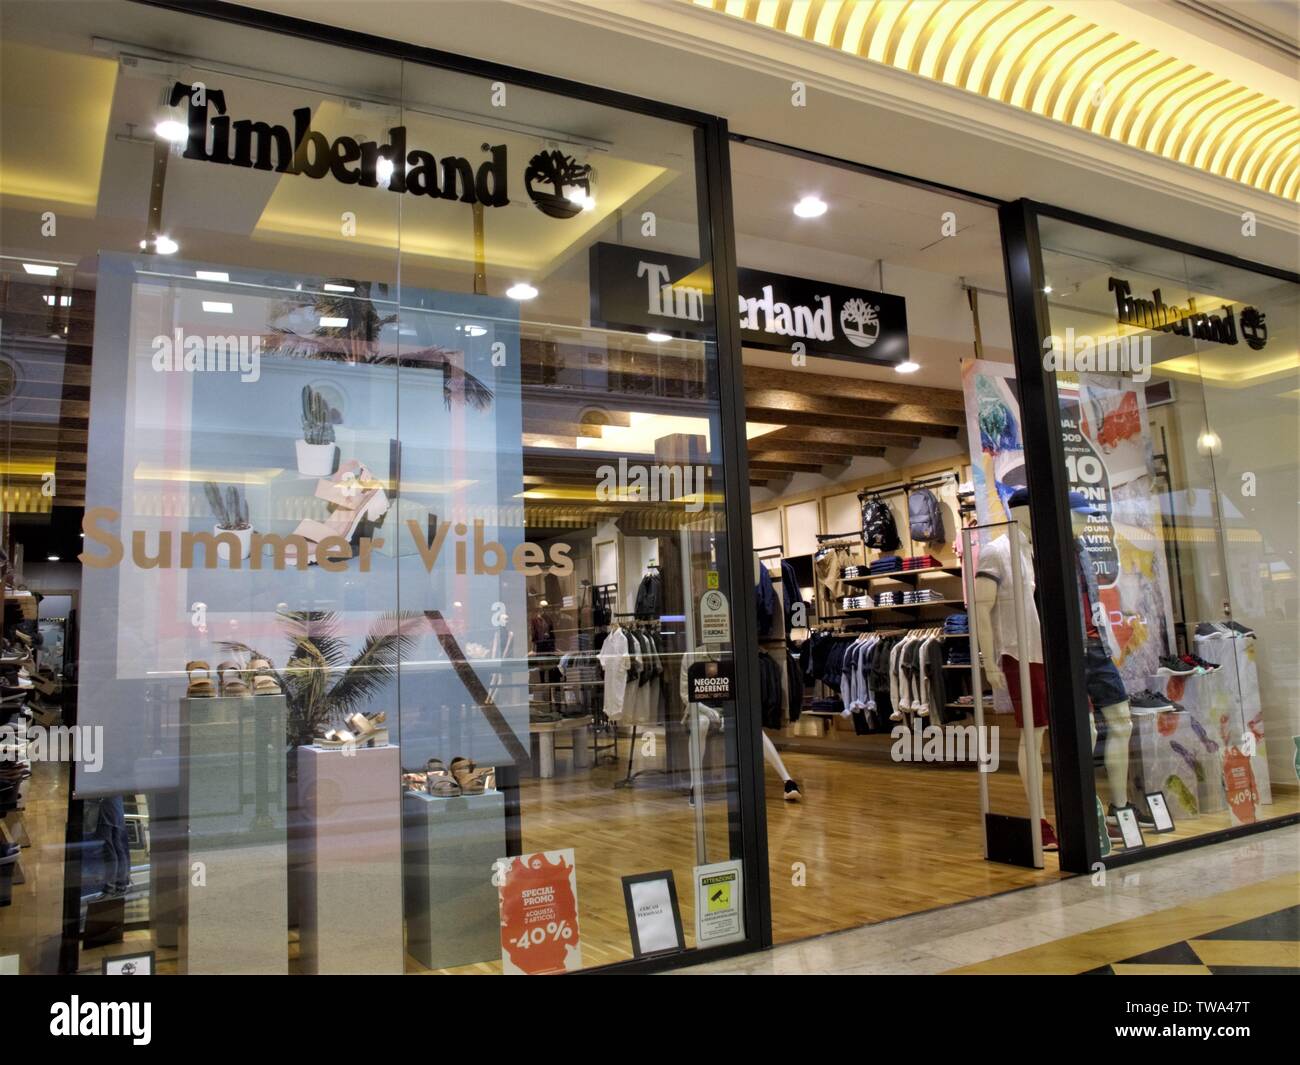 TIMBERLAND SHOES FASHION STORE ENTRANCE IN EUROMA 2 SHOPPING CENTER IN ROME  Stock Photo - Alamy